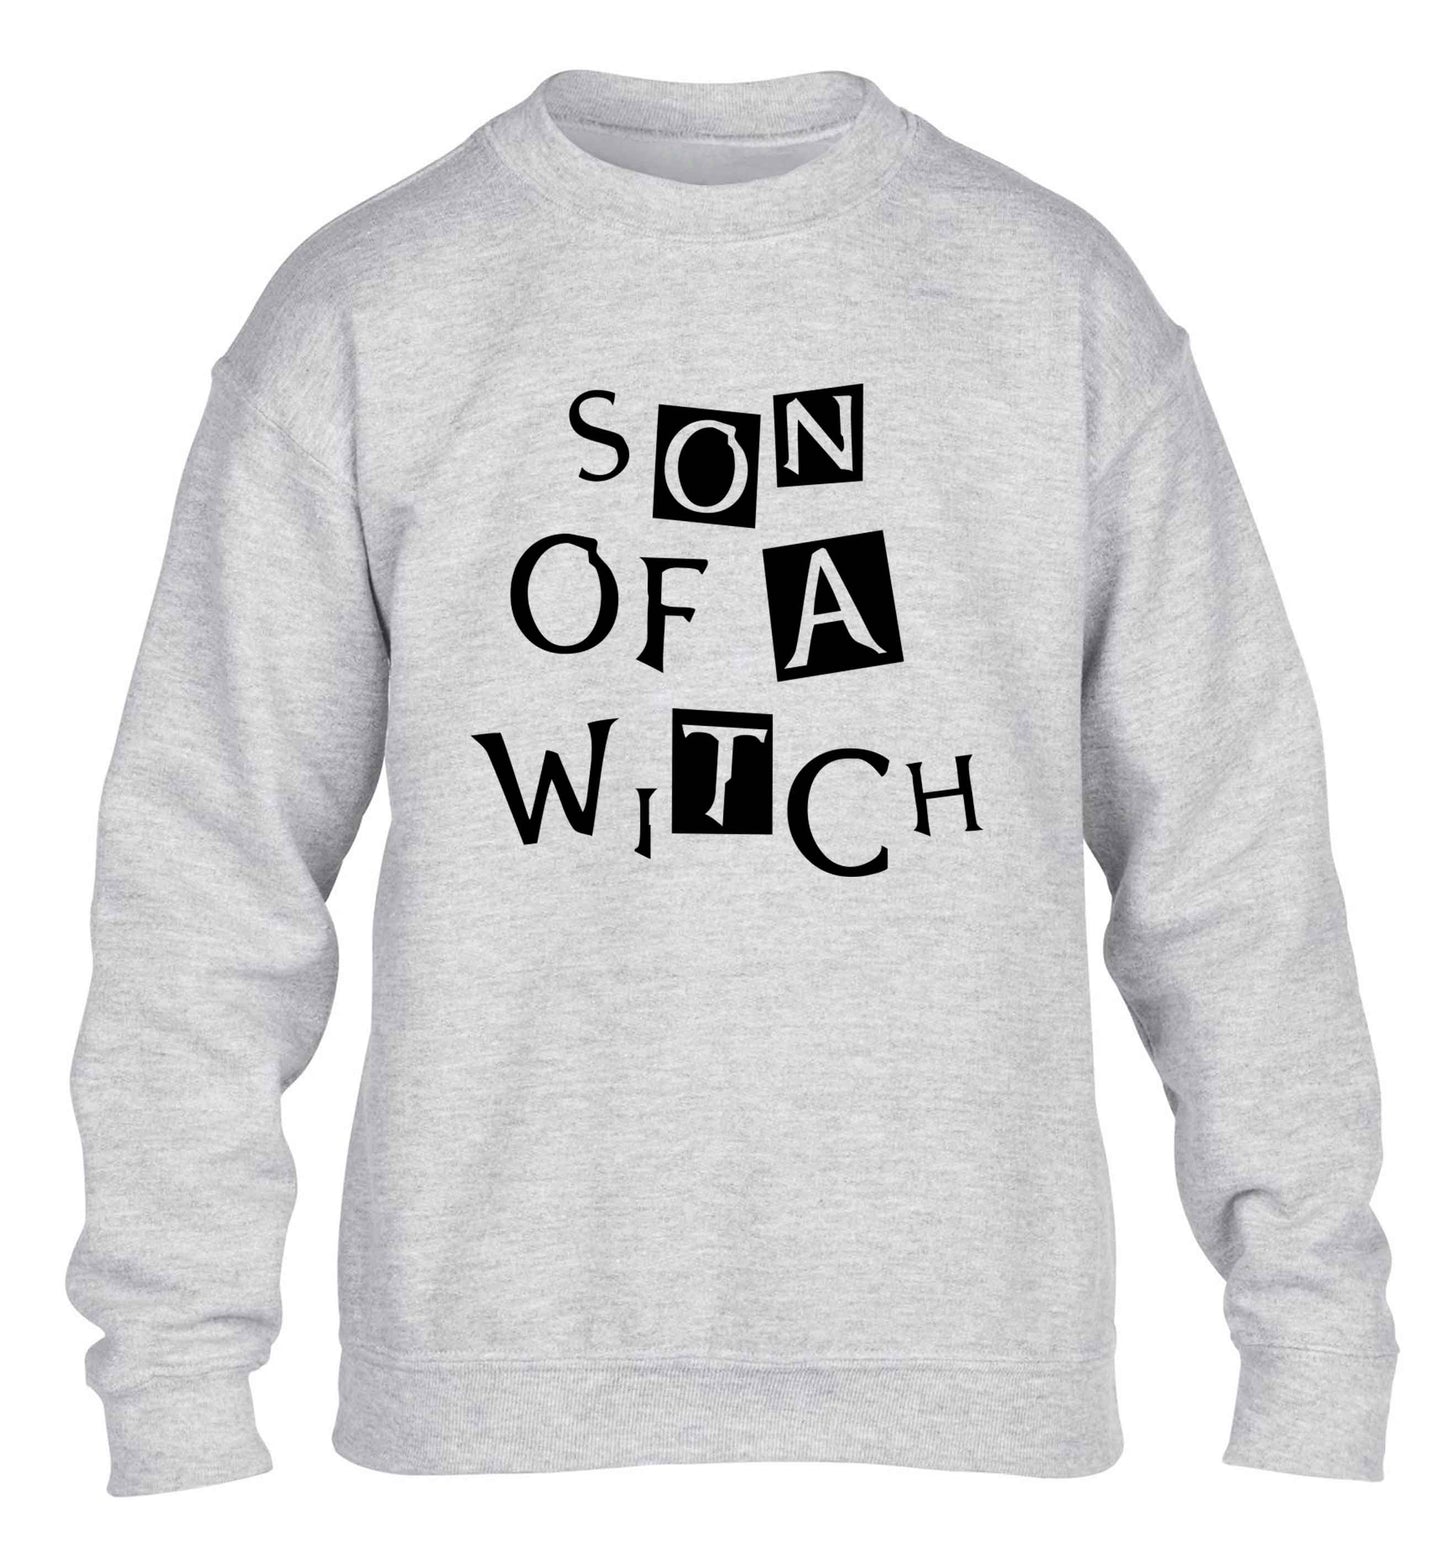 Son of a witch children's grey sweater 12-13 Years